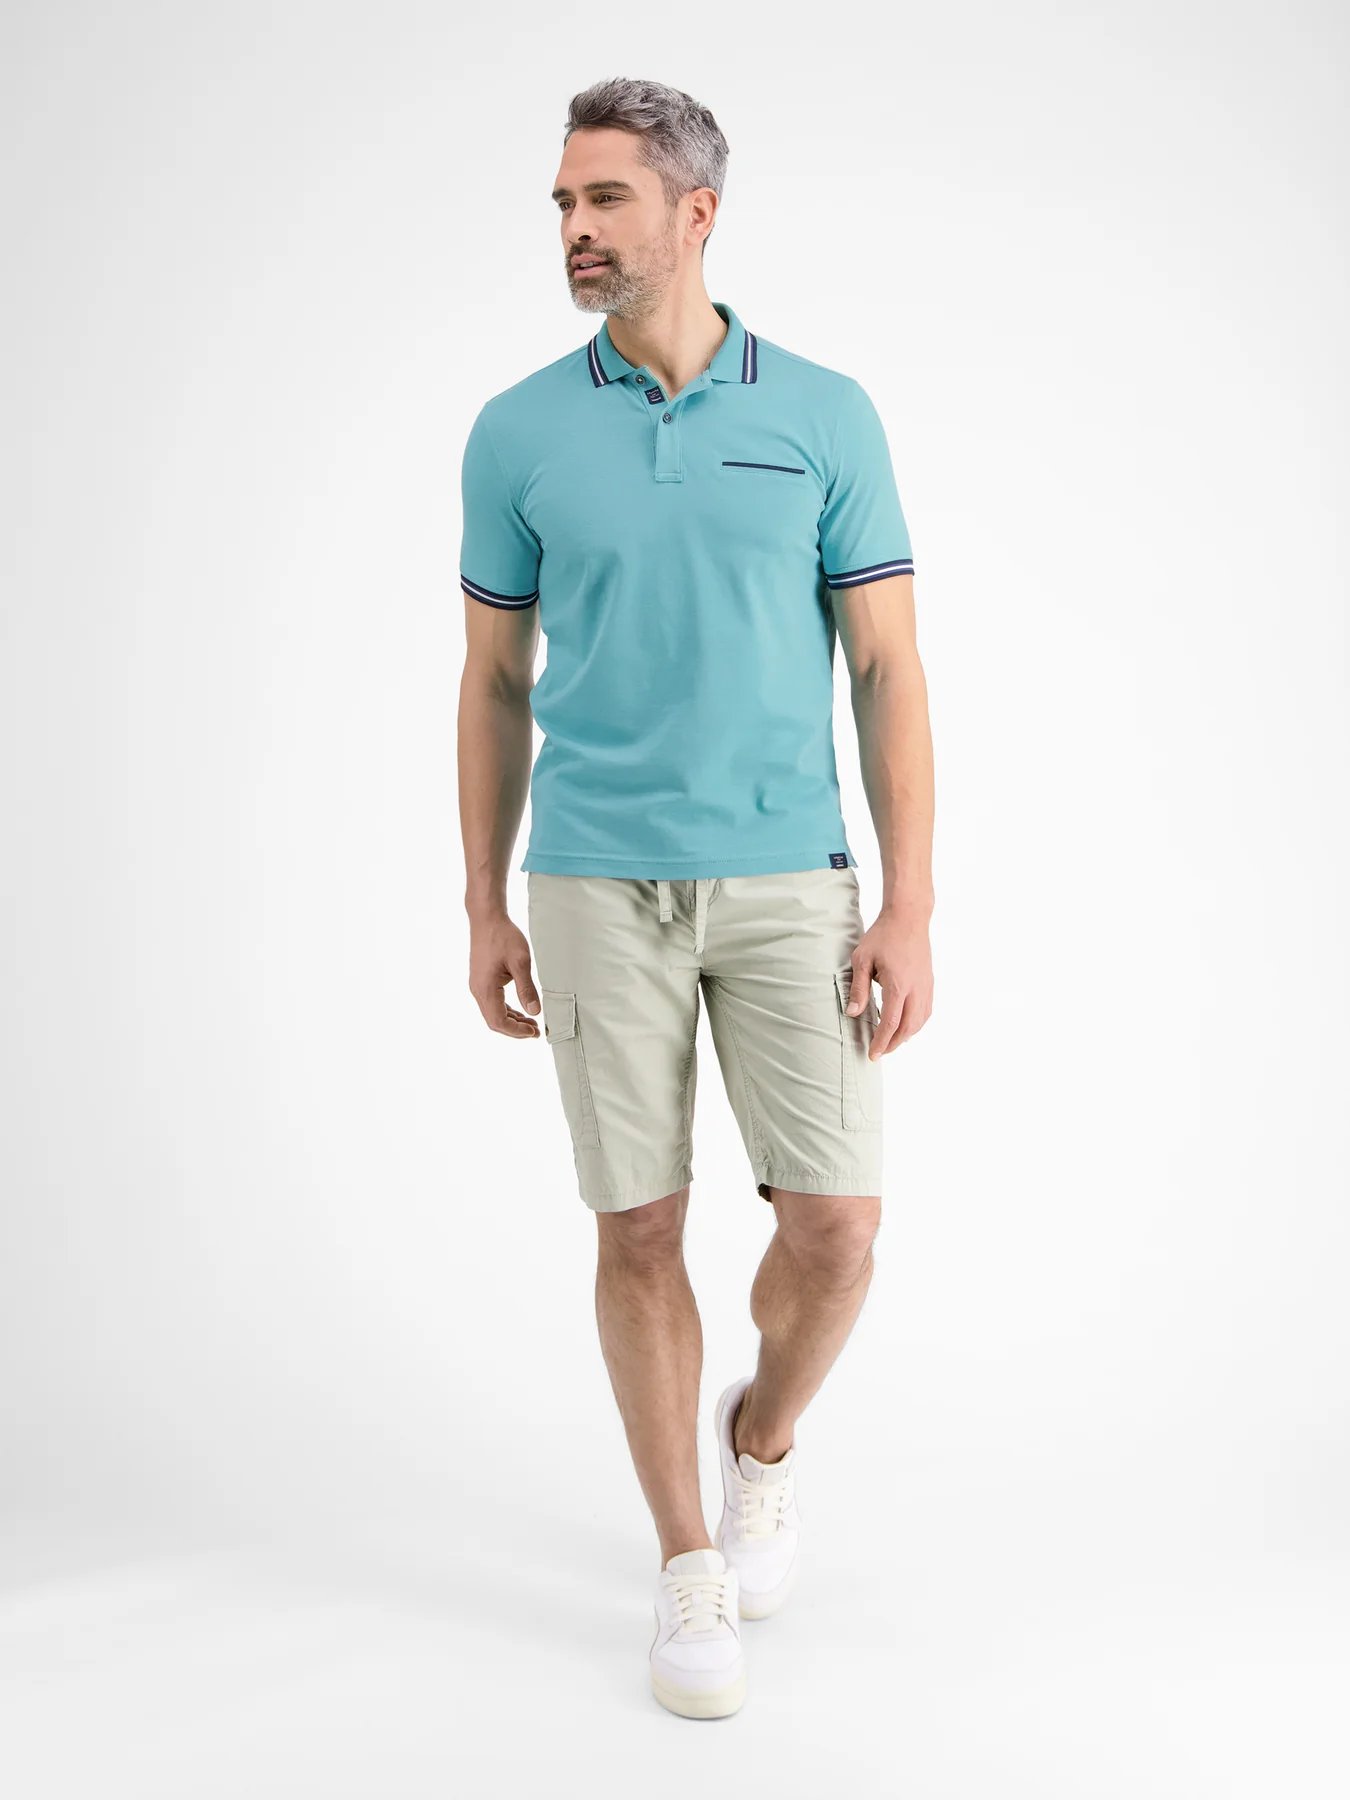 LERROS Poloshirt with Structure | - Light Blues Cotton Turquoise 